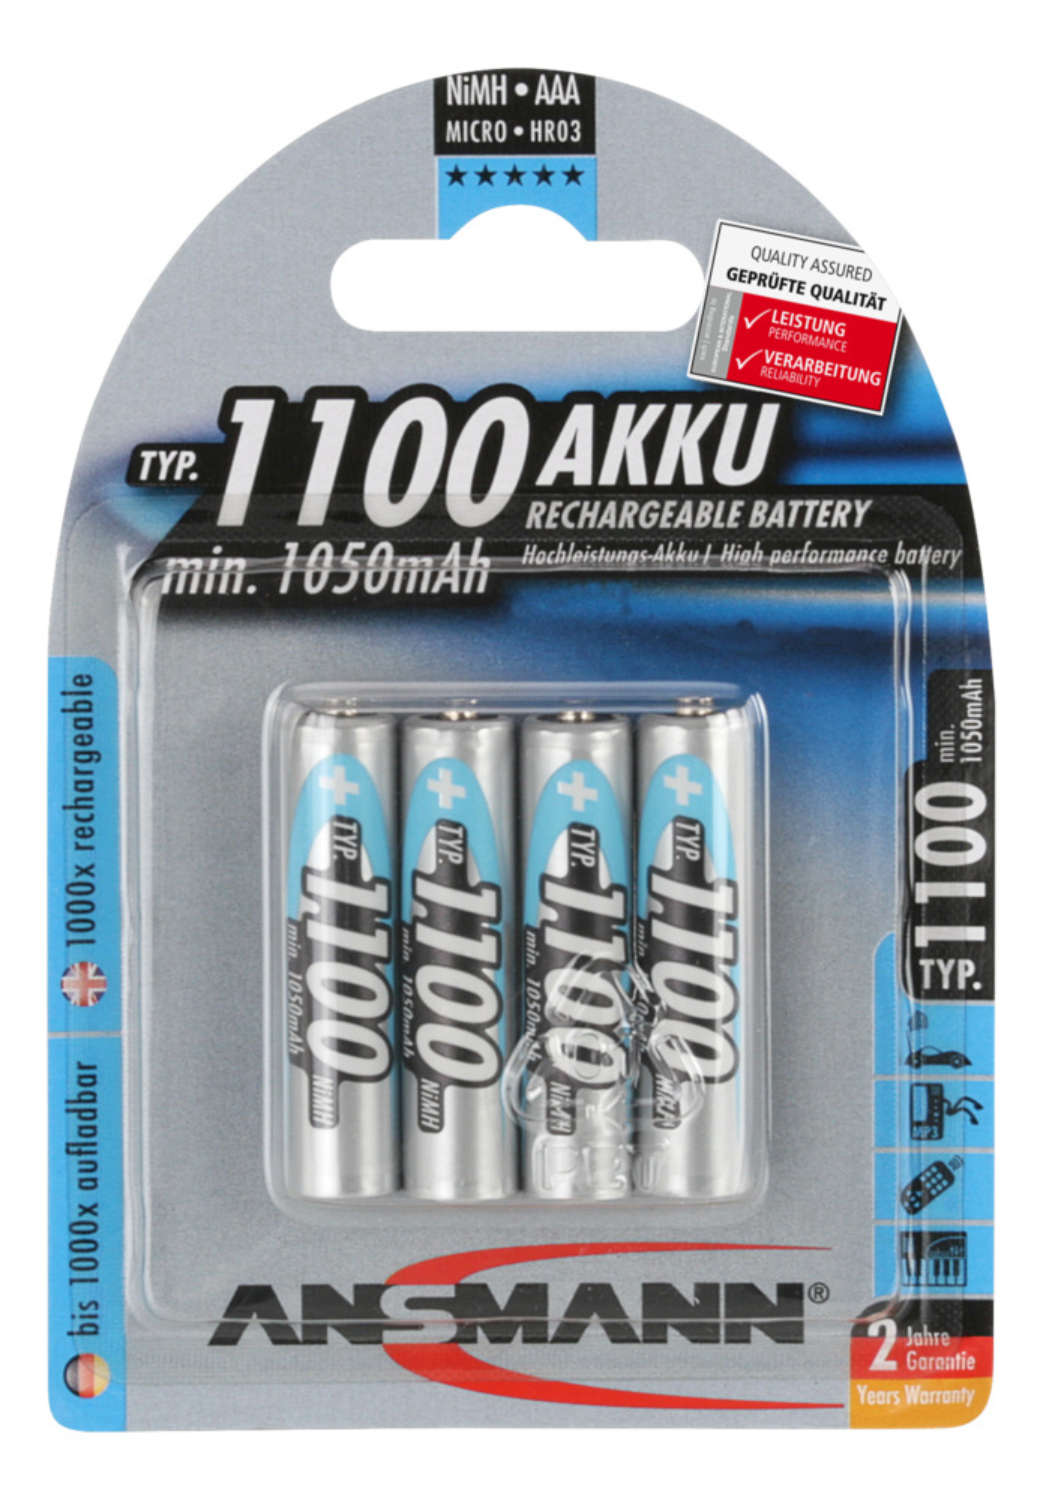 ANSMANN Micro - AAA size - Pack of 4,NiMH Rechargeable Batteries